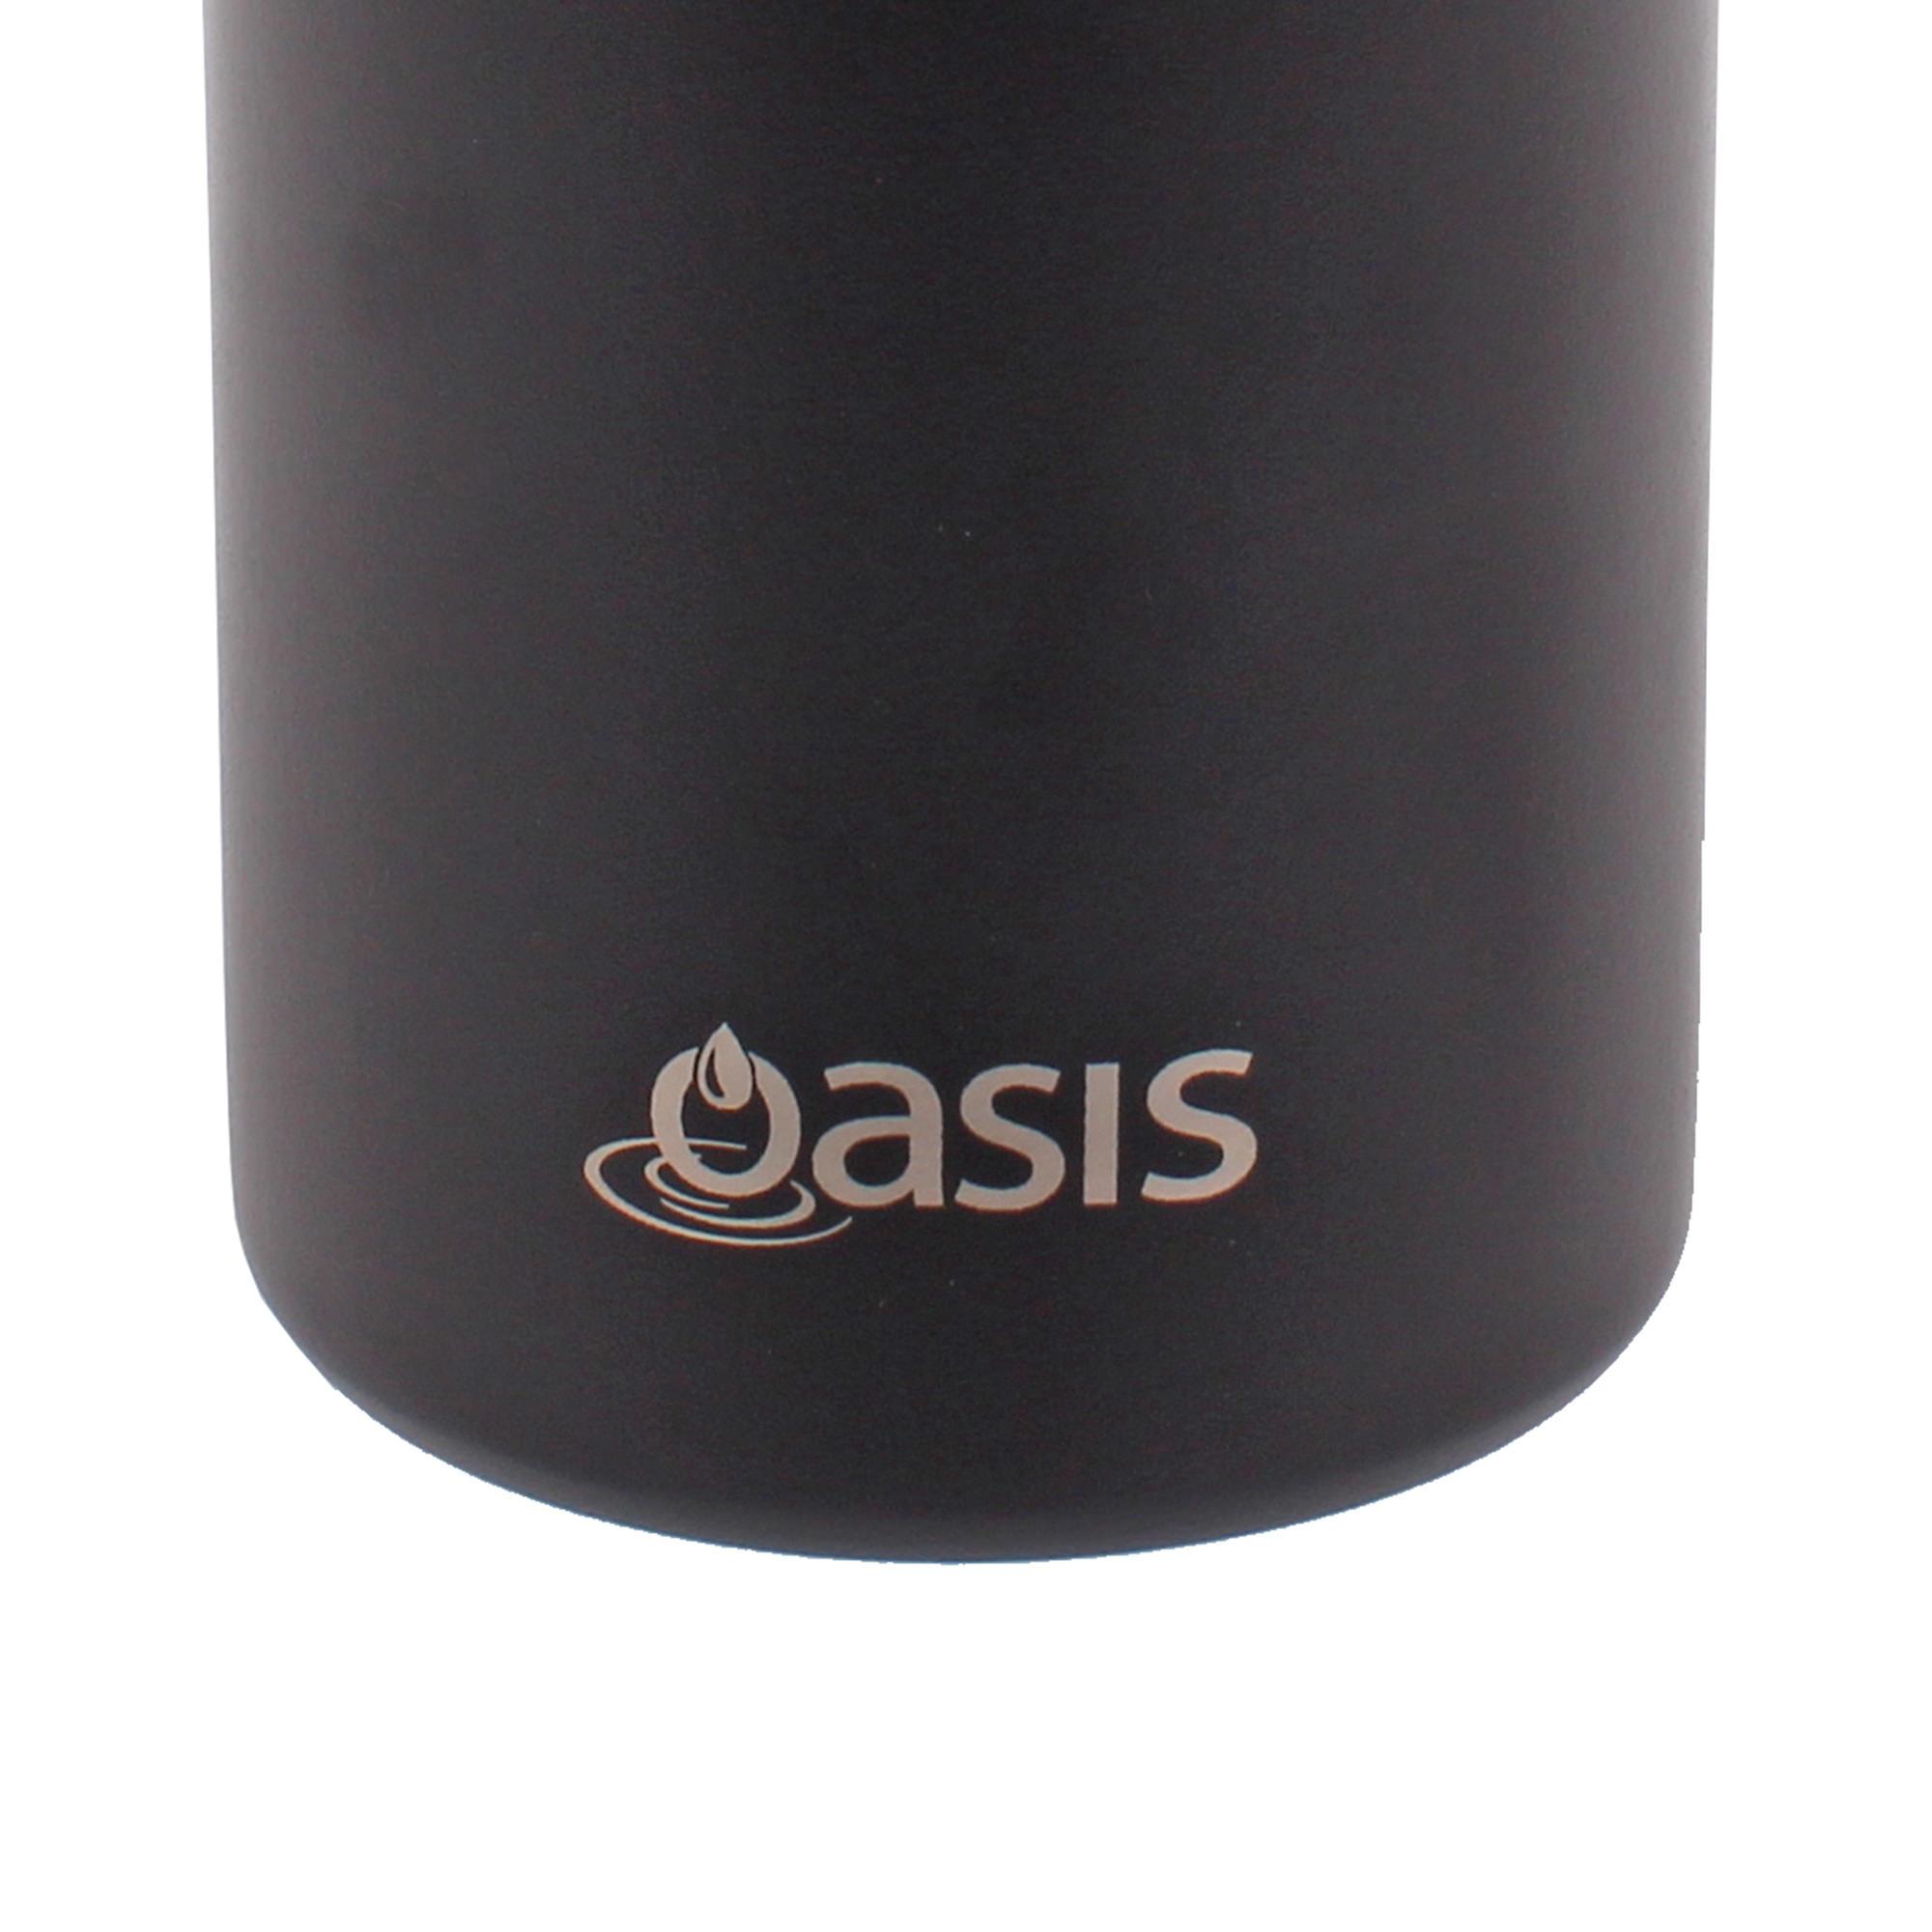 Oasis Double Wall Insulated Sports Bottle 780ml Black Image 3